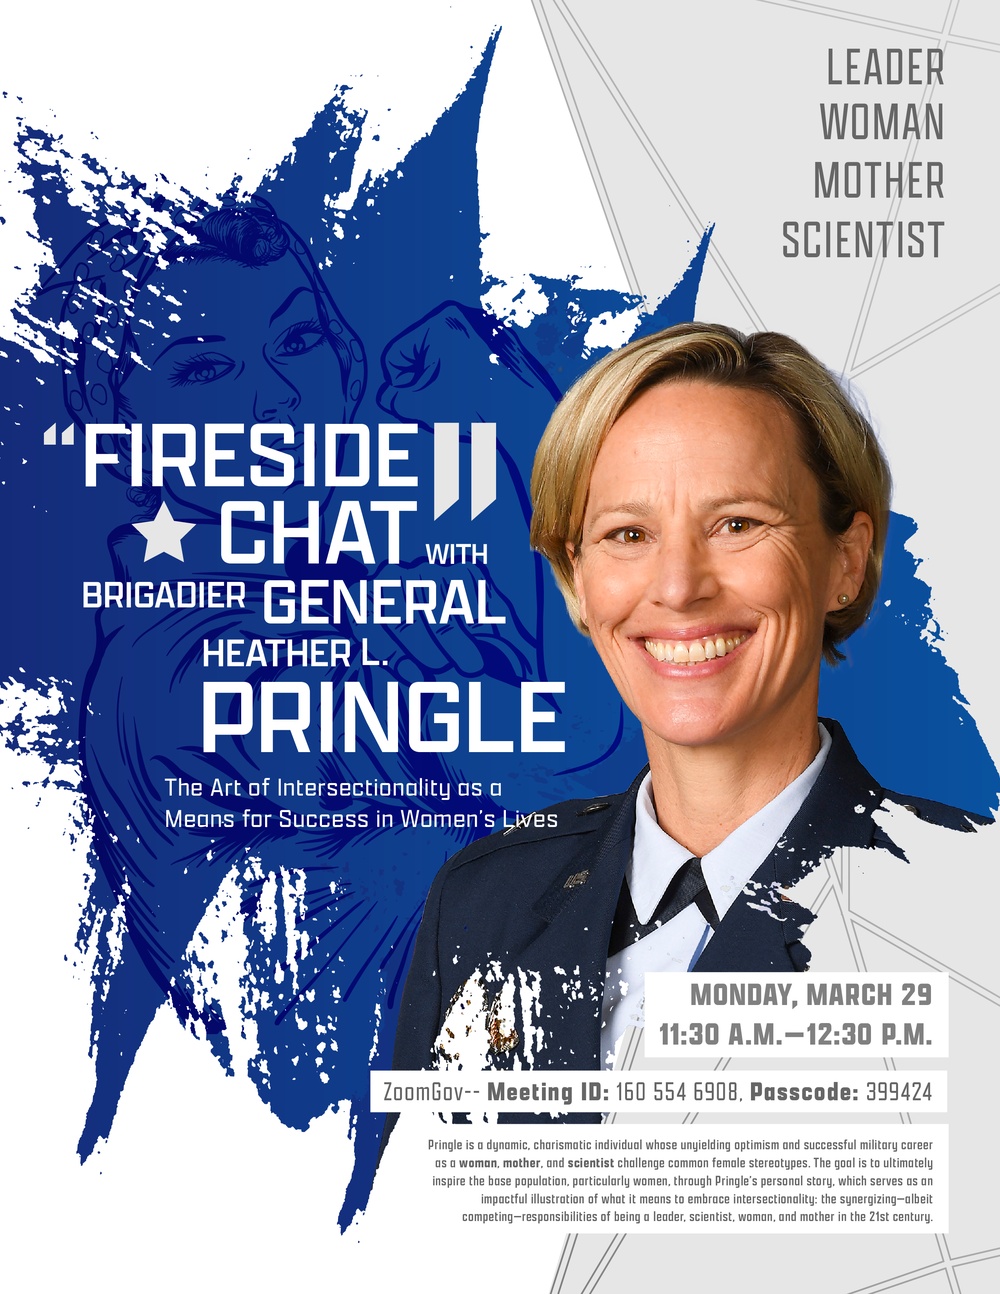 Fireside Chat with Brigadier General Heather L. Pringle